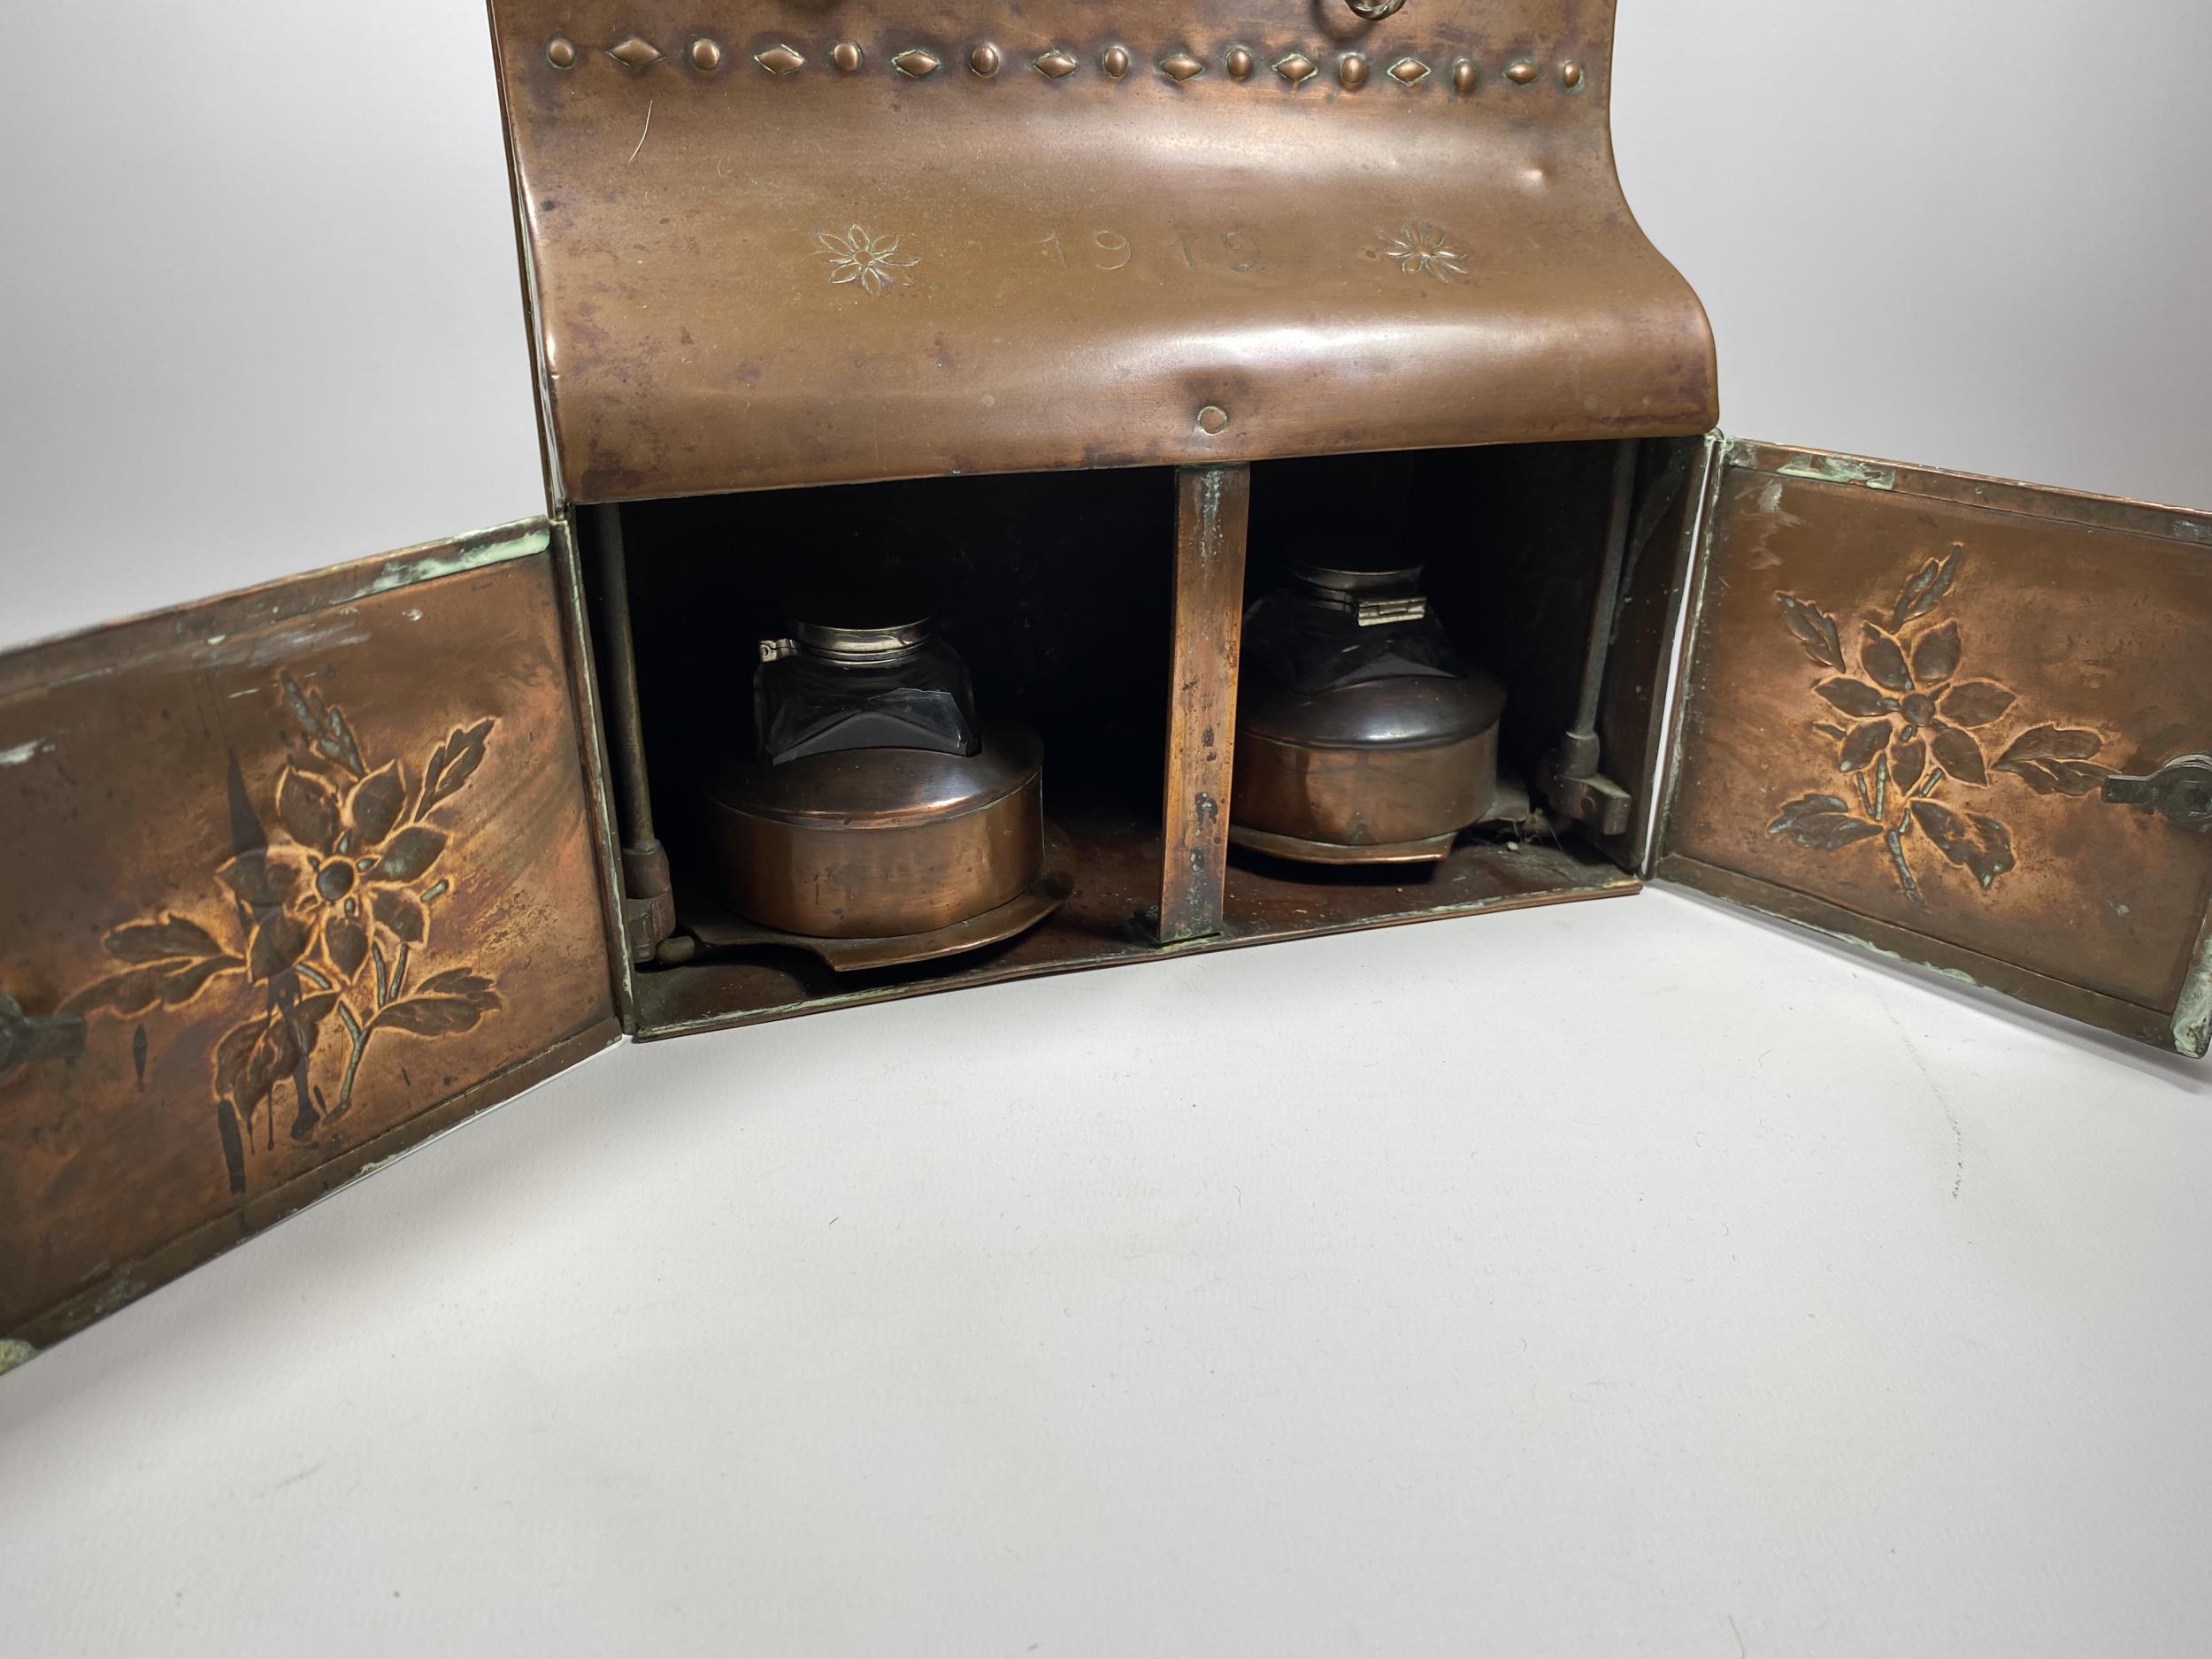 AN ARTS AND CRAFTS 1912 COPPER DESKSTAND WITH LIFT UP TOP SECTION, TWO SMALL DRAWERS AND LOWER DOORS - Image 4 of 7